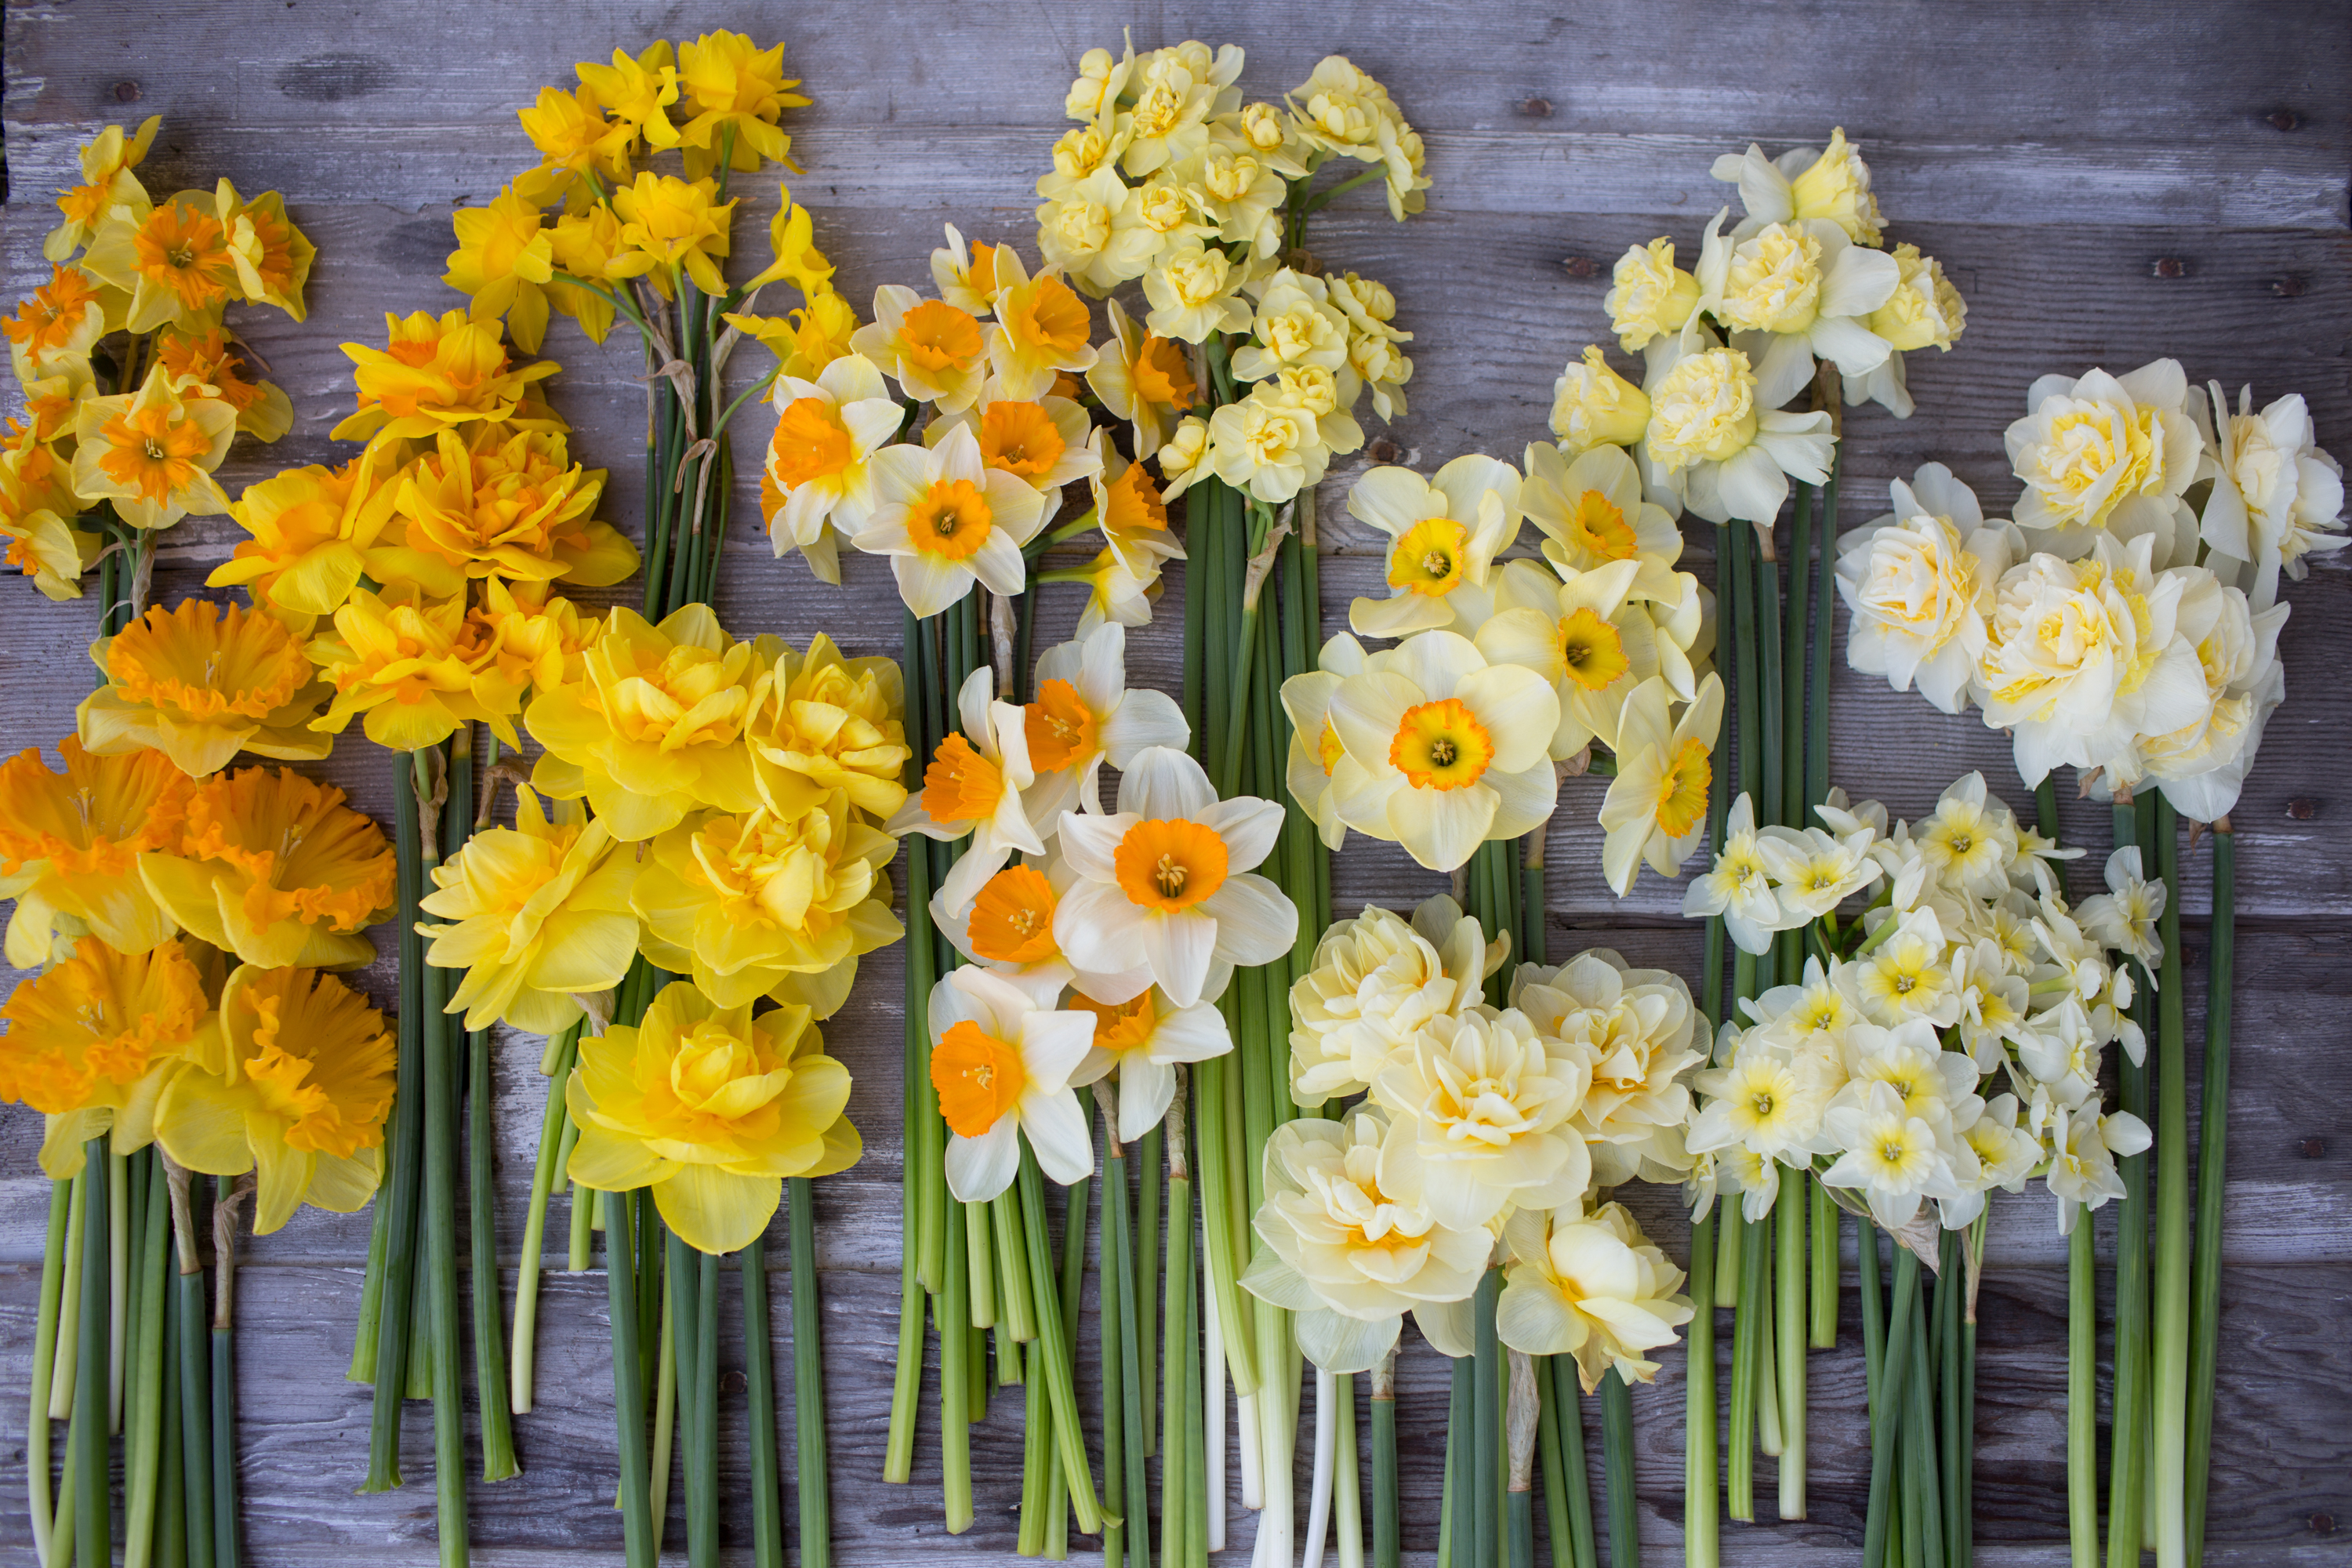 Bunches of daffodils